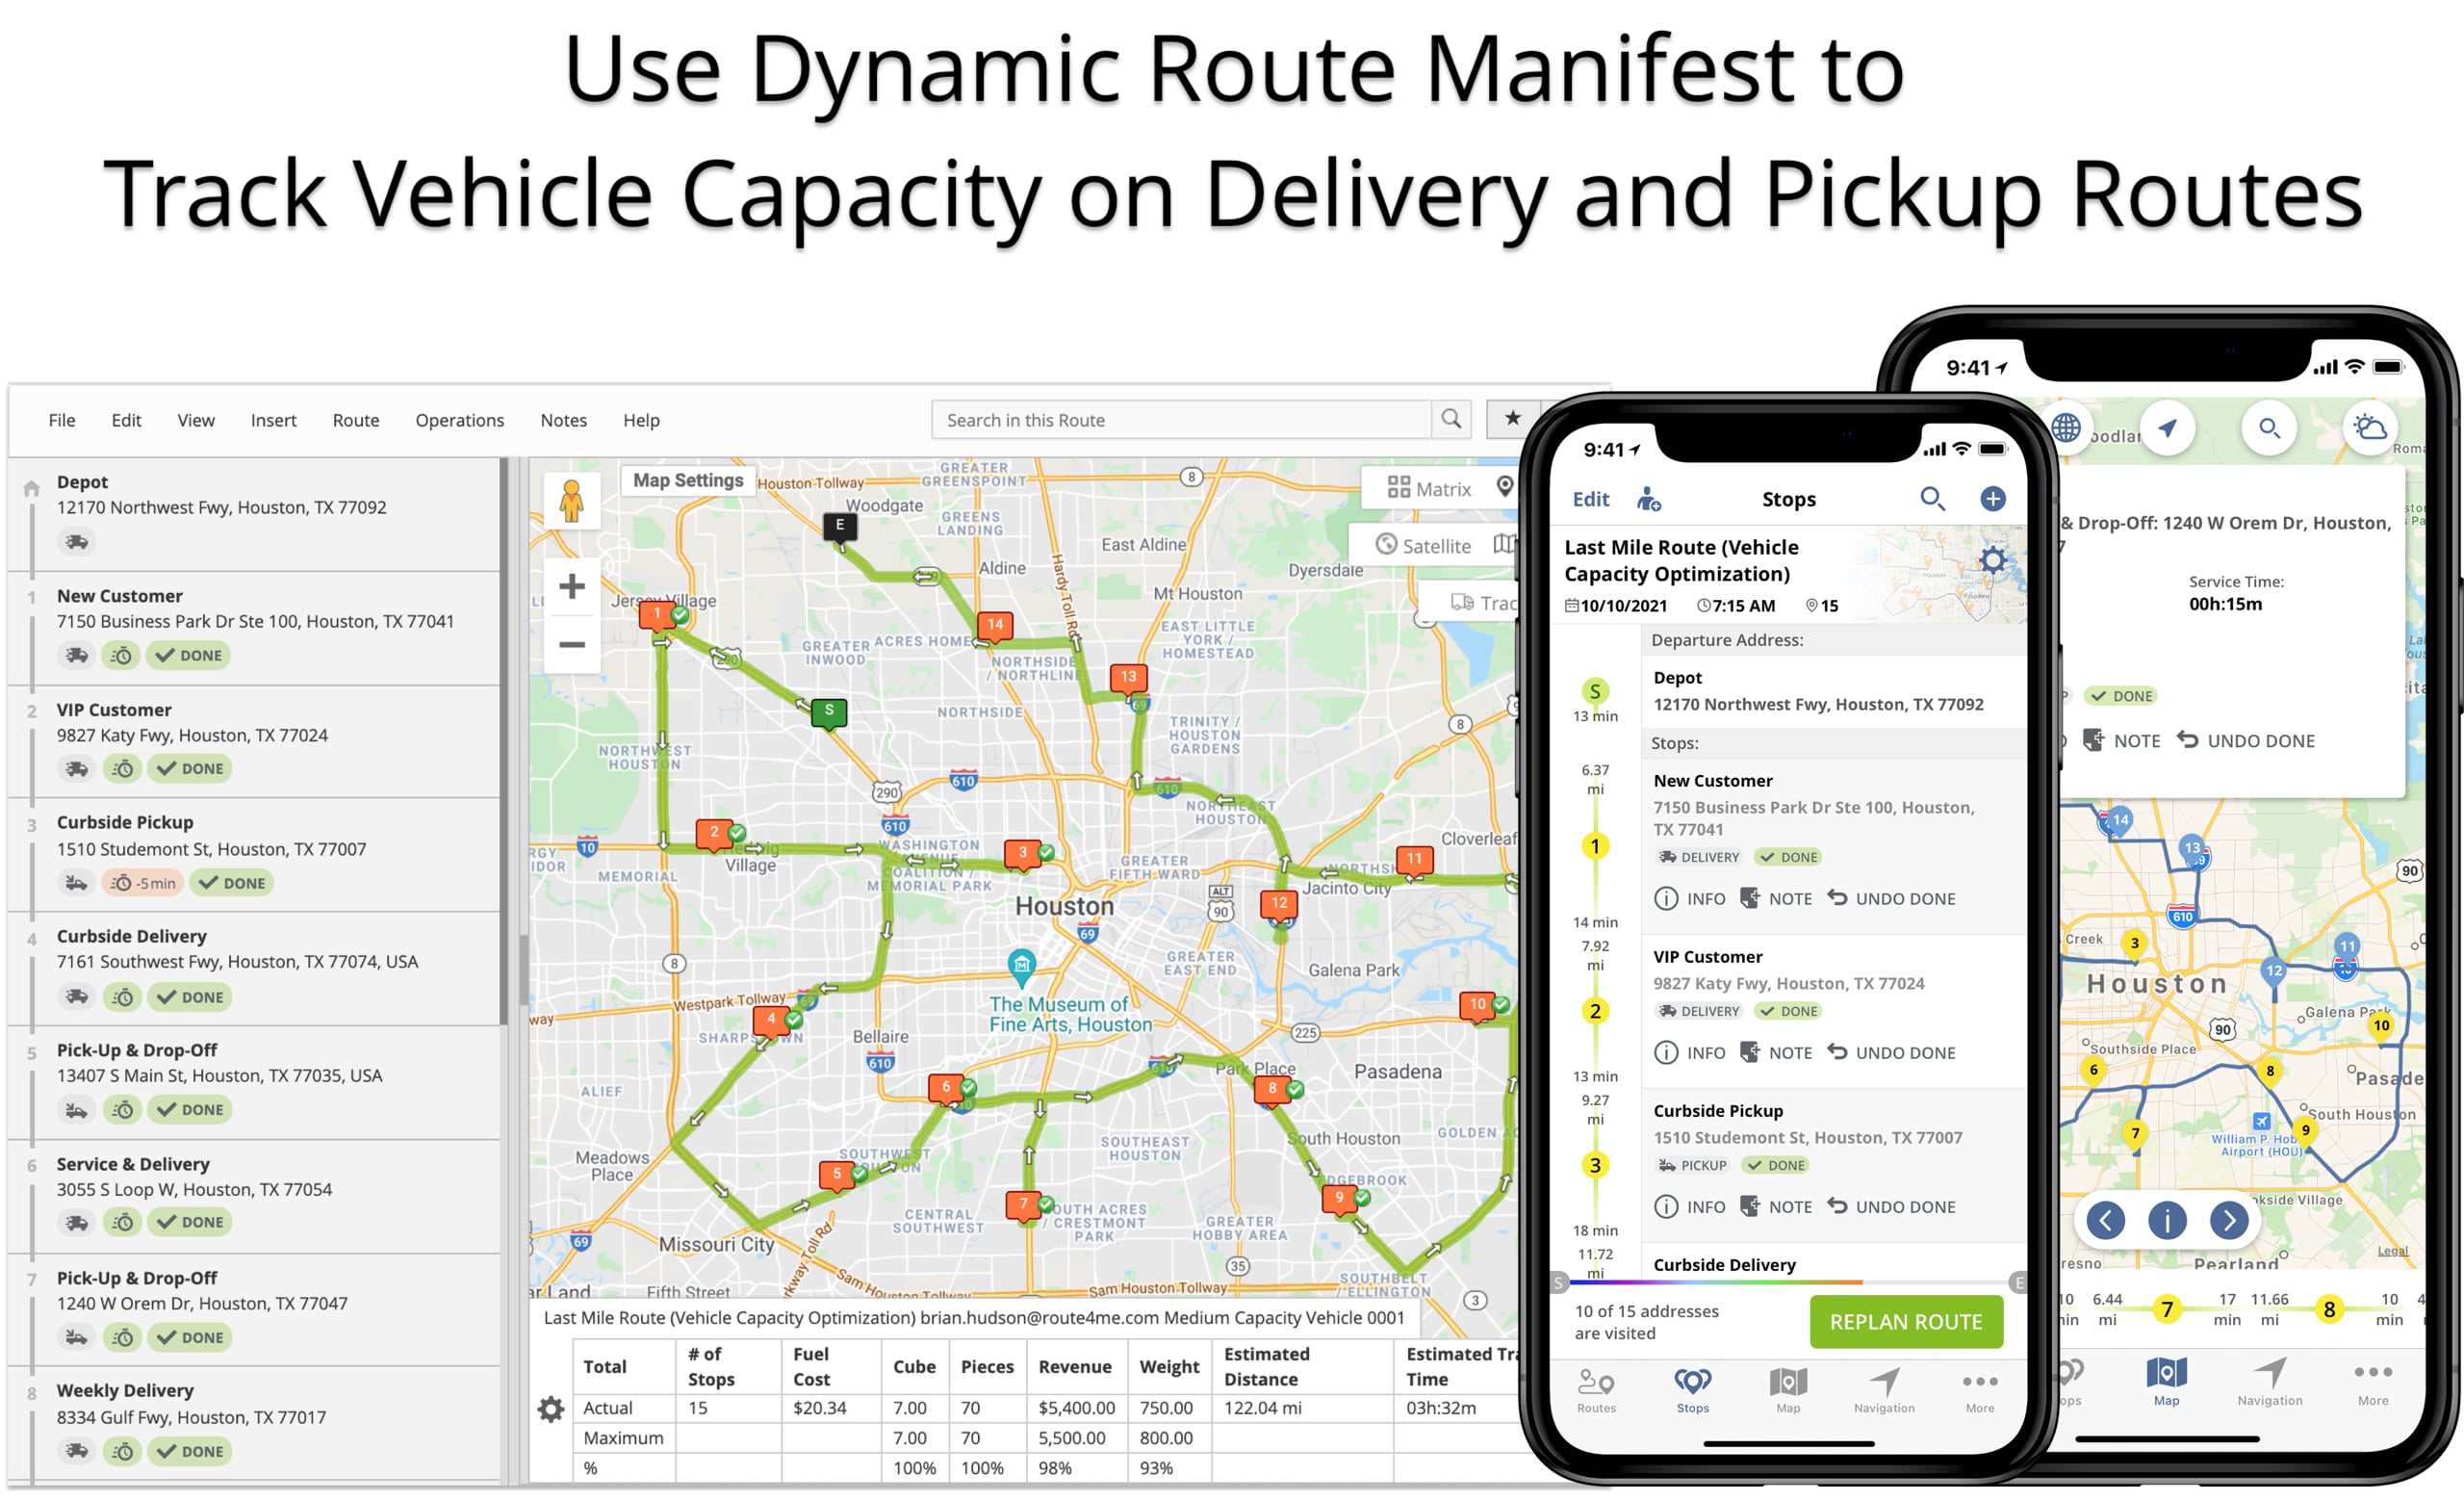 Use route manifest to check dynamic vehicle load capacity after deliveries and pickups.